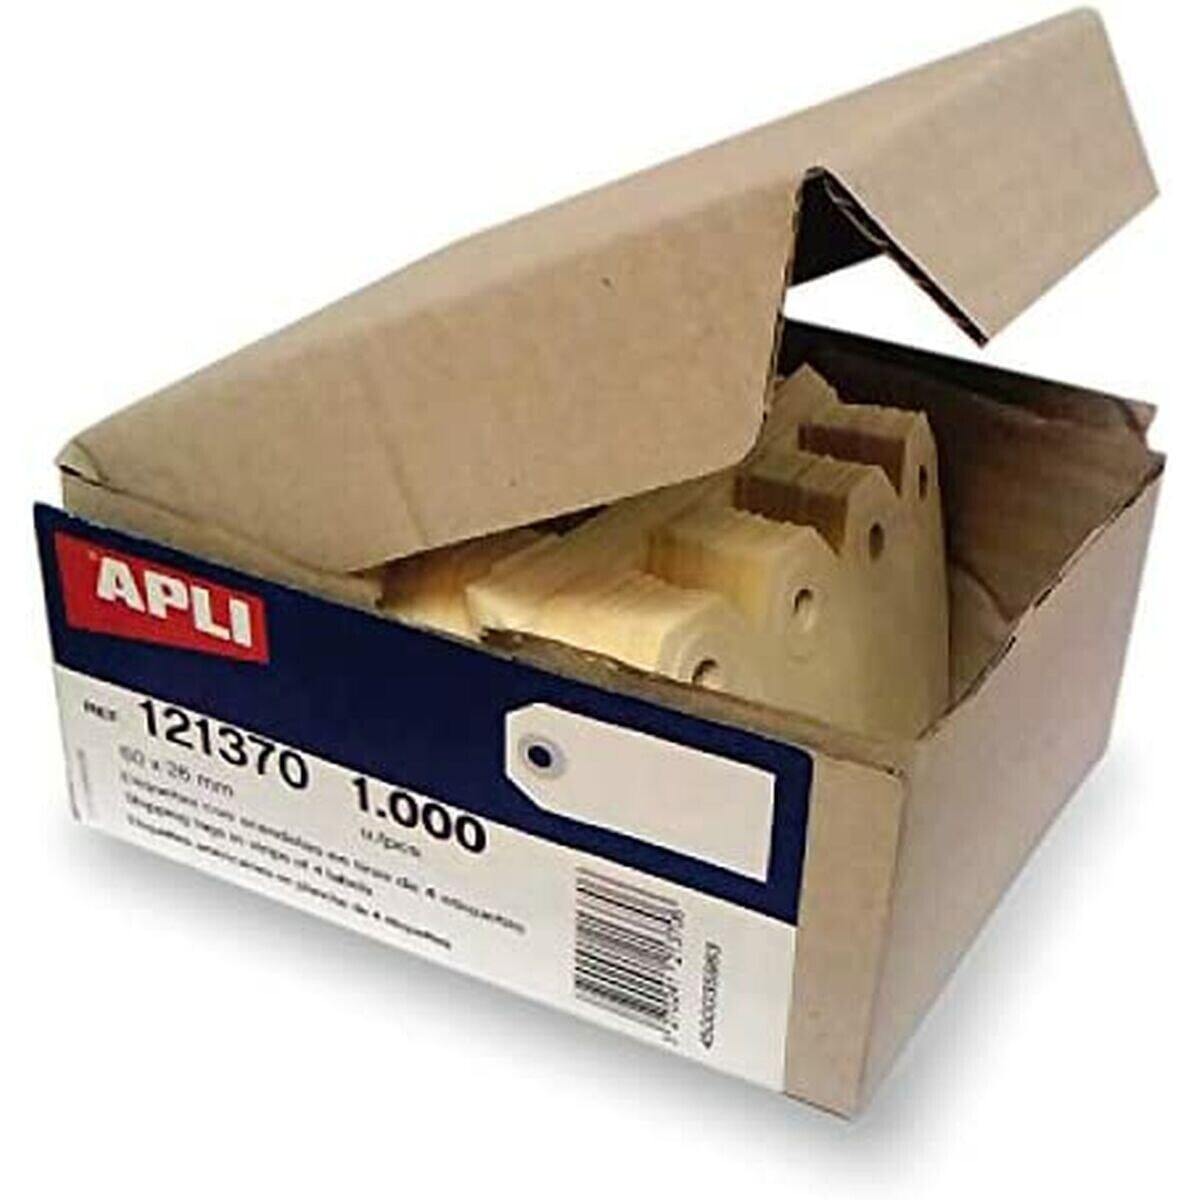 Printer Labels Apli 1000 Pieces With washer Cream 80 x 38 mm